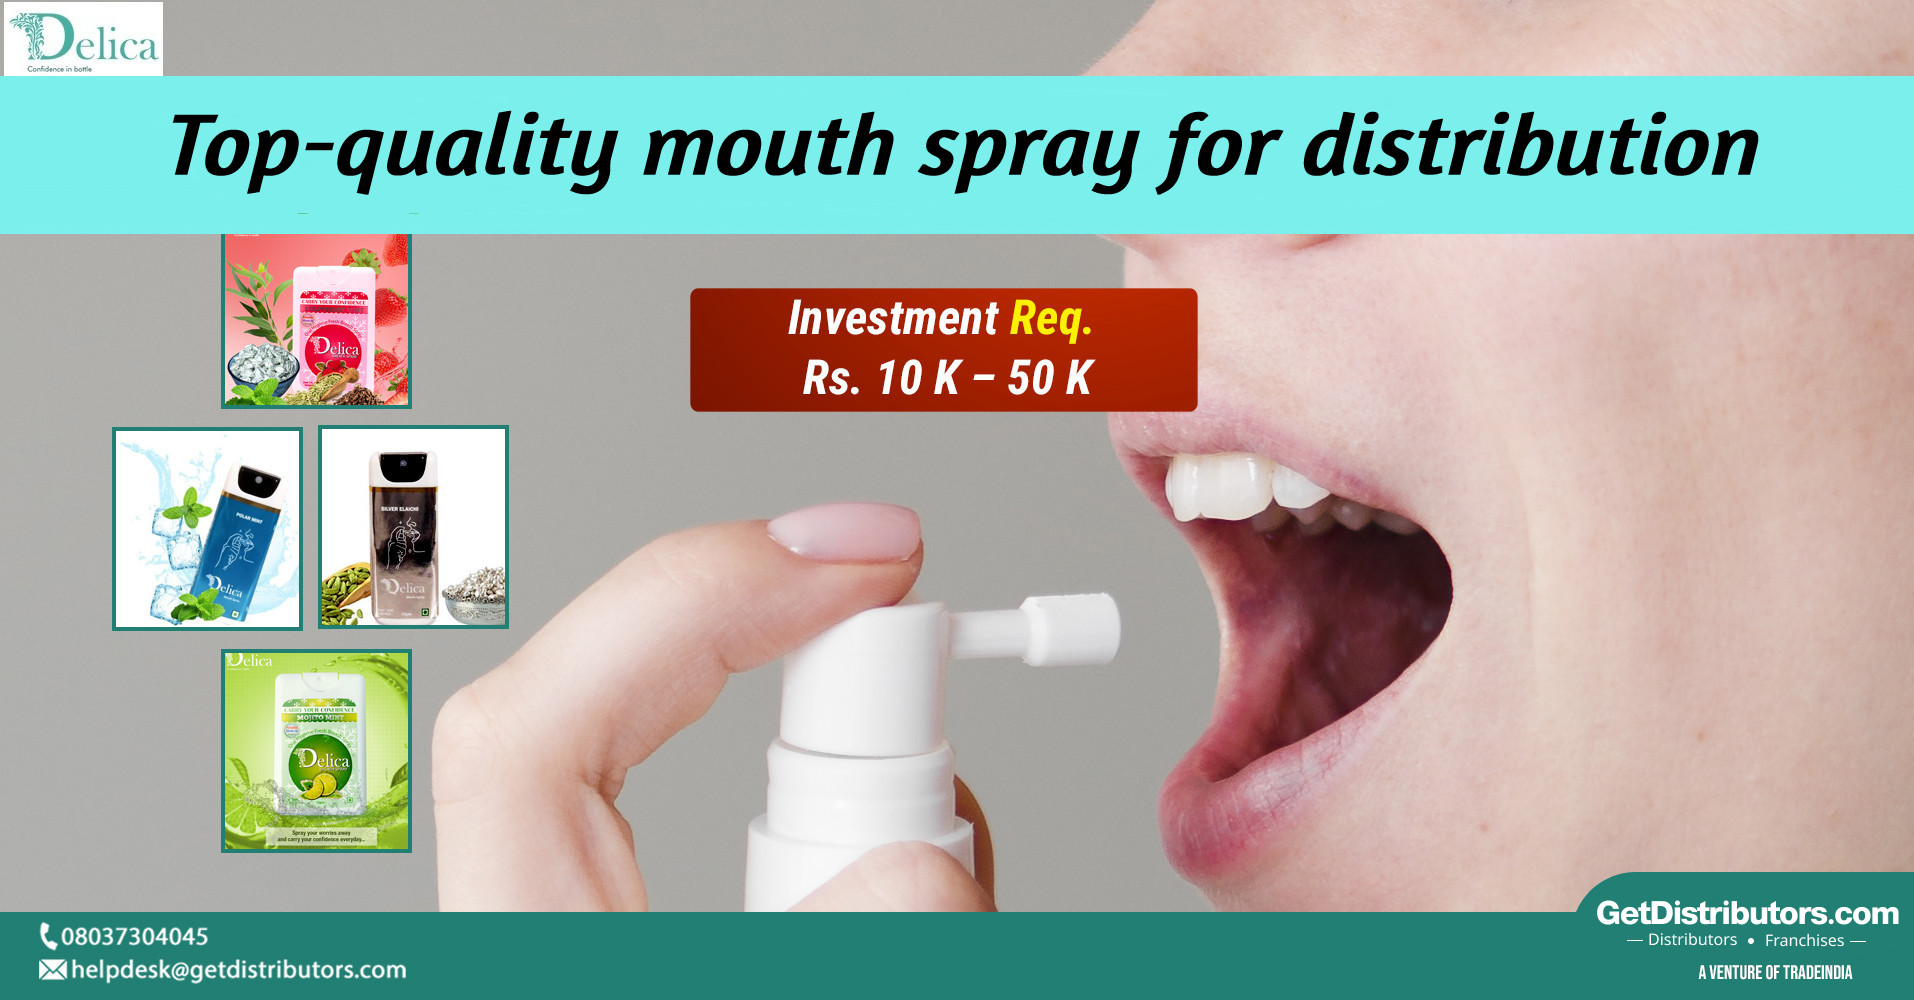 Top-quality mouth spray for distribution